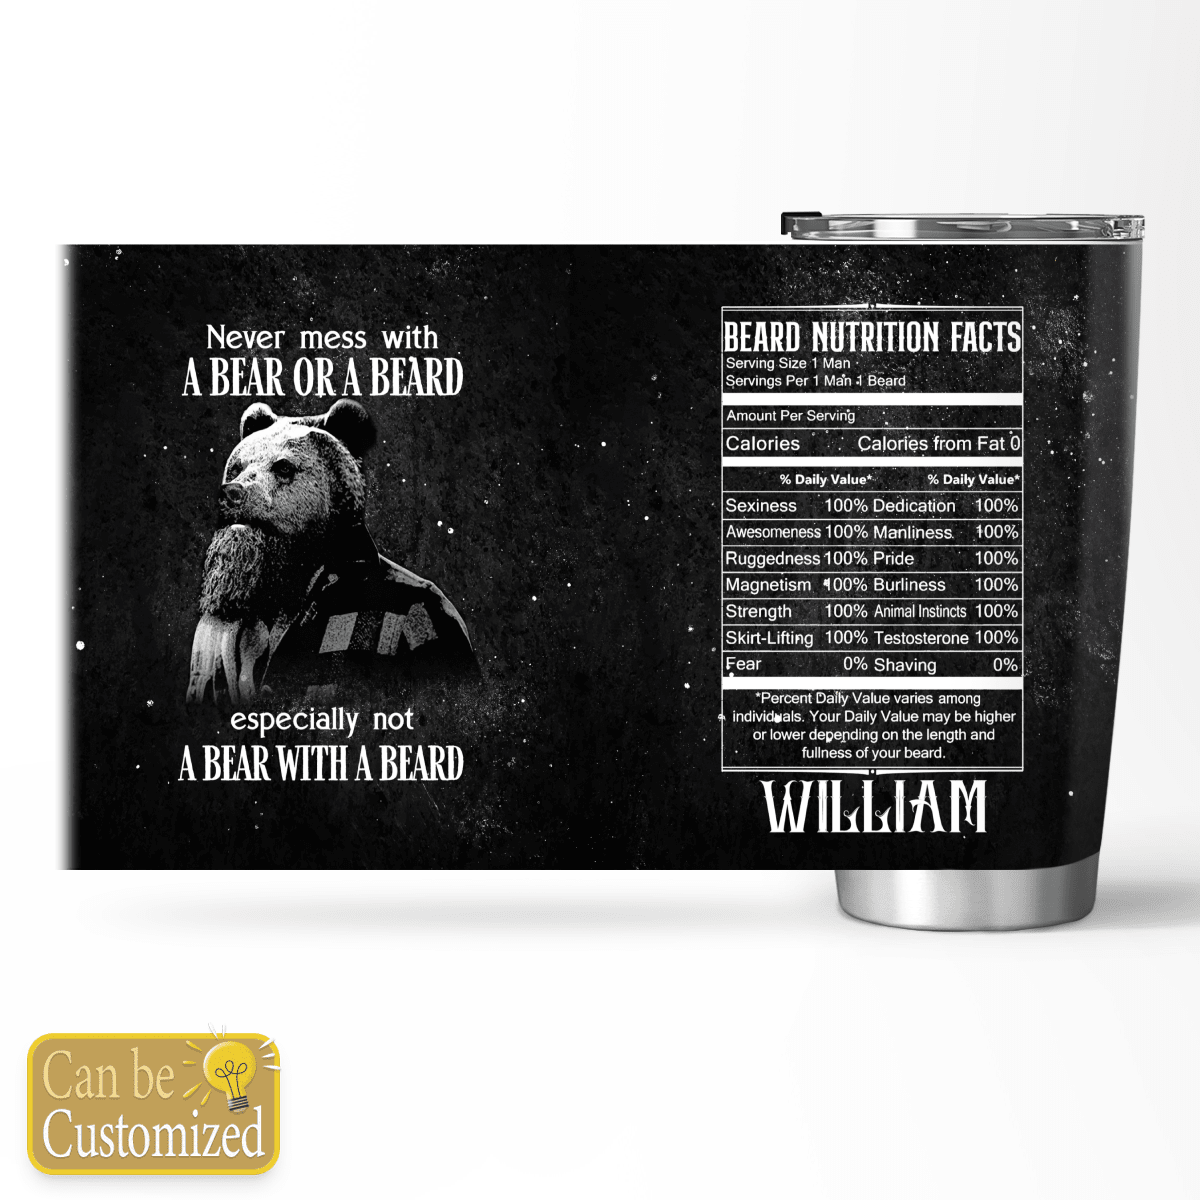 Beard Bear Never Mess With Nutrition Facts Personalized Stainless Steel Tumbler